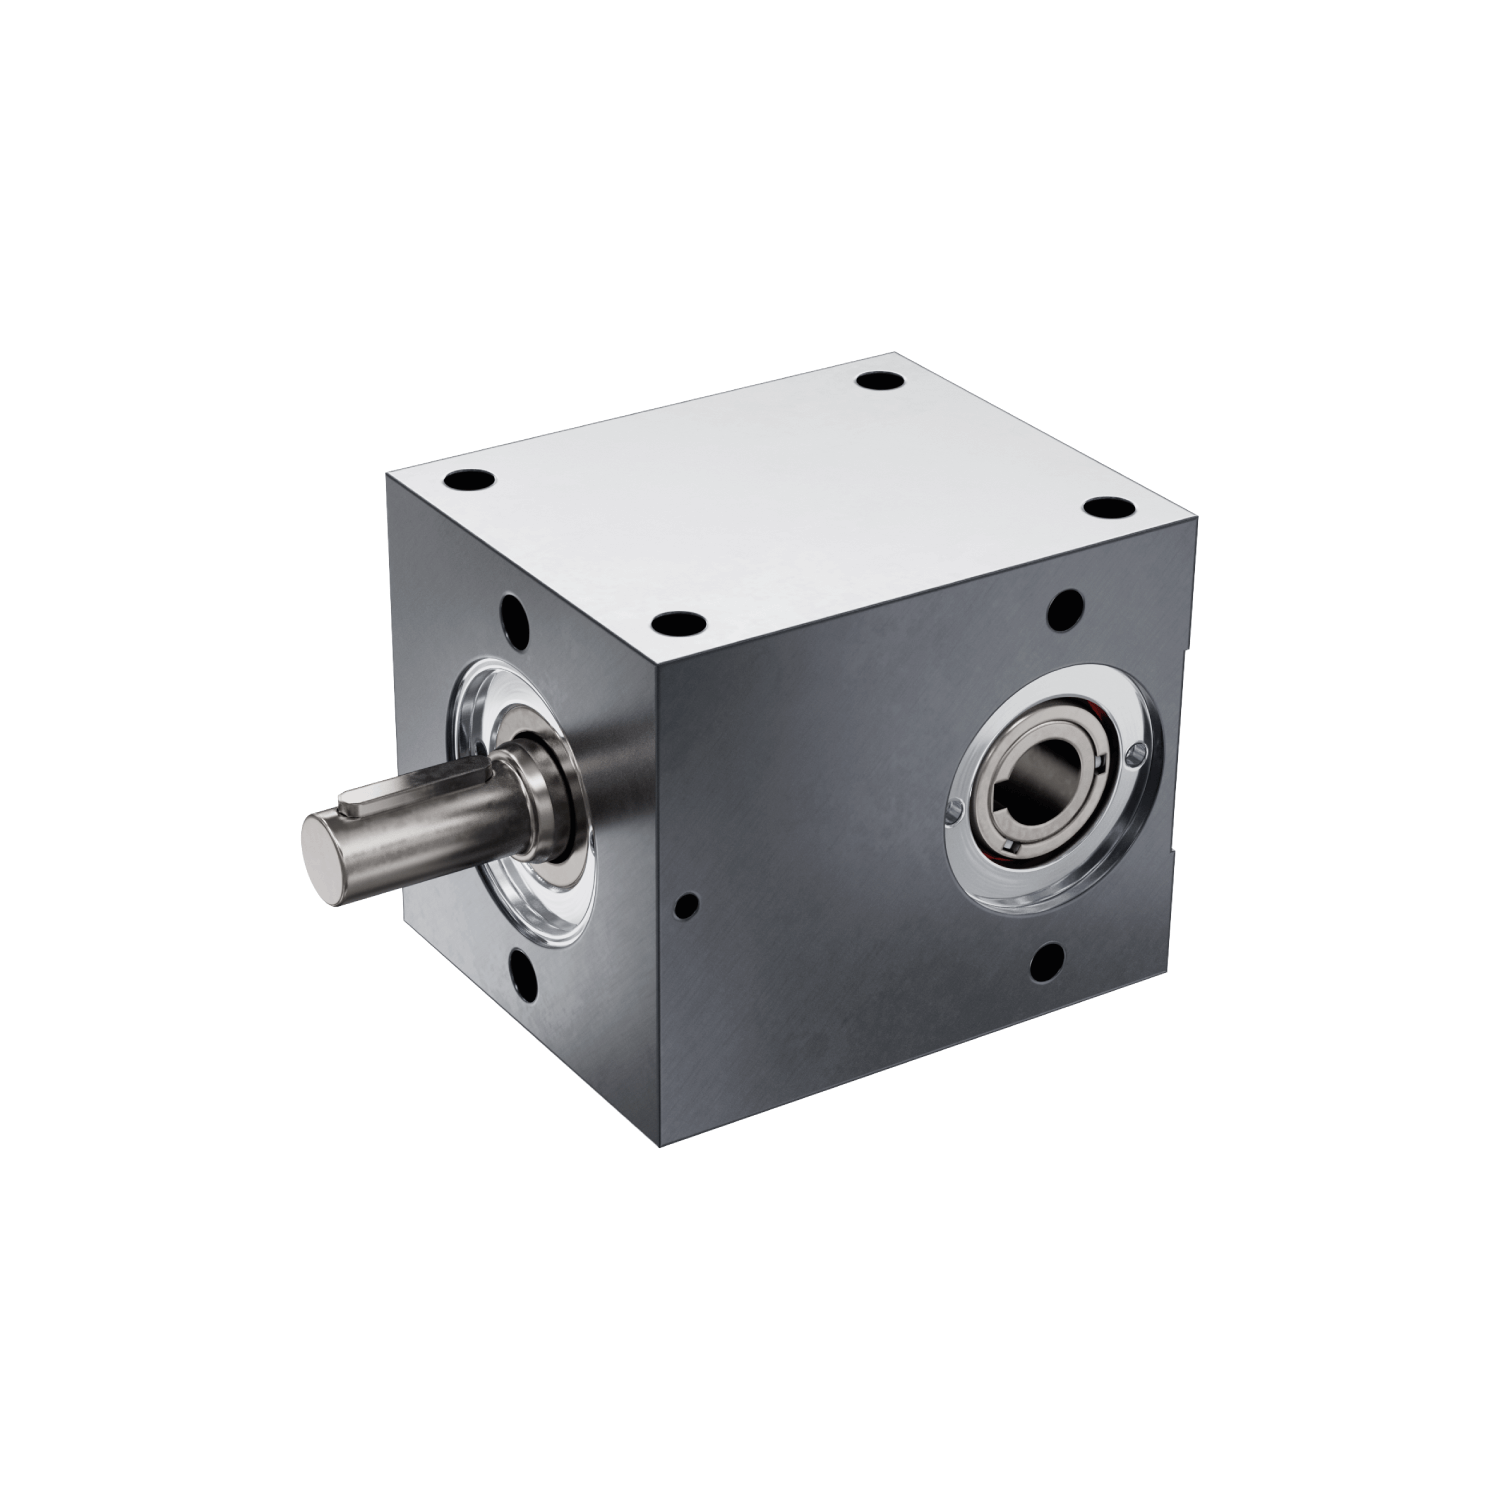 bevel-gearboxes-ksz-2-h-series.png